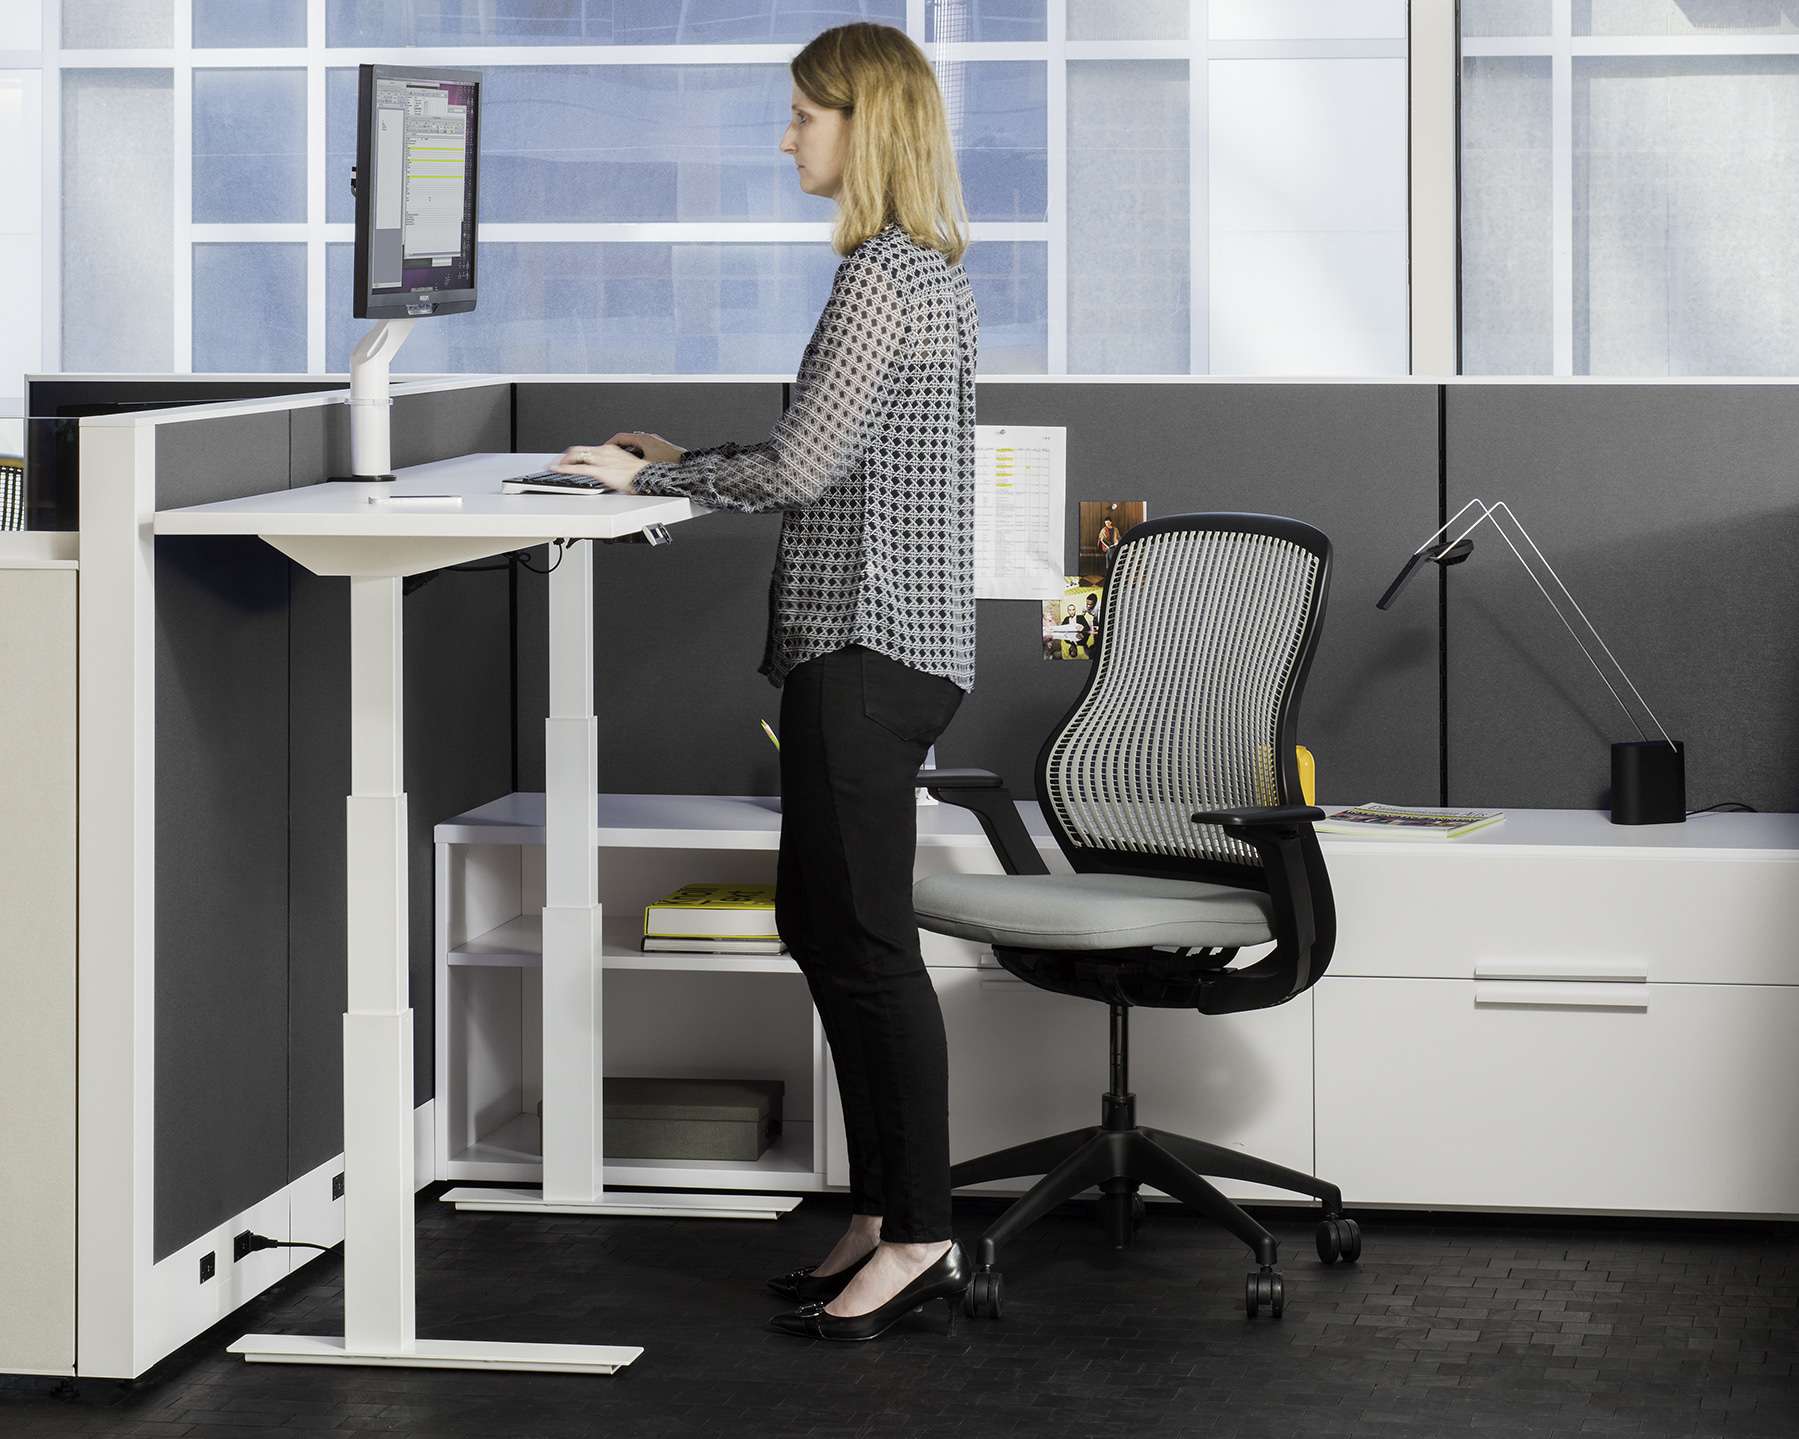 https://www.sysfurniture.com/wp-content/uploads/2016/06/Knoll-Tone-electric-height-adjustable-table.jpg